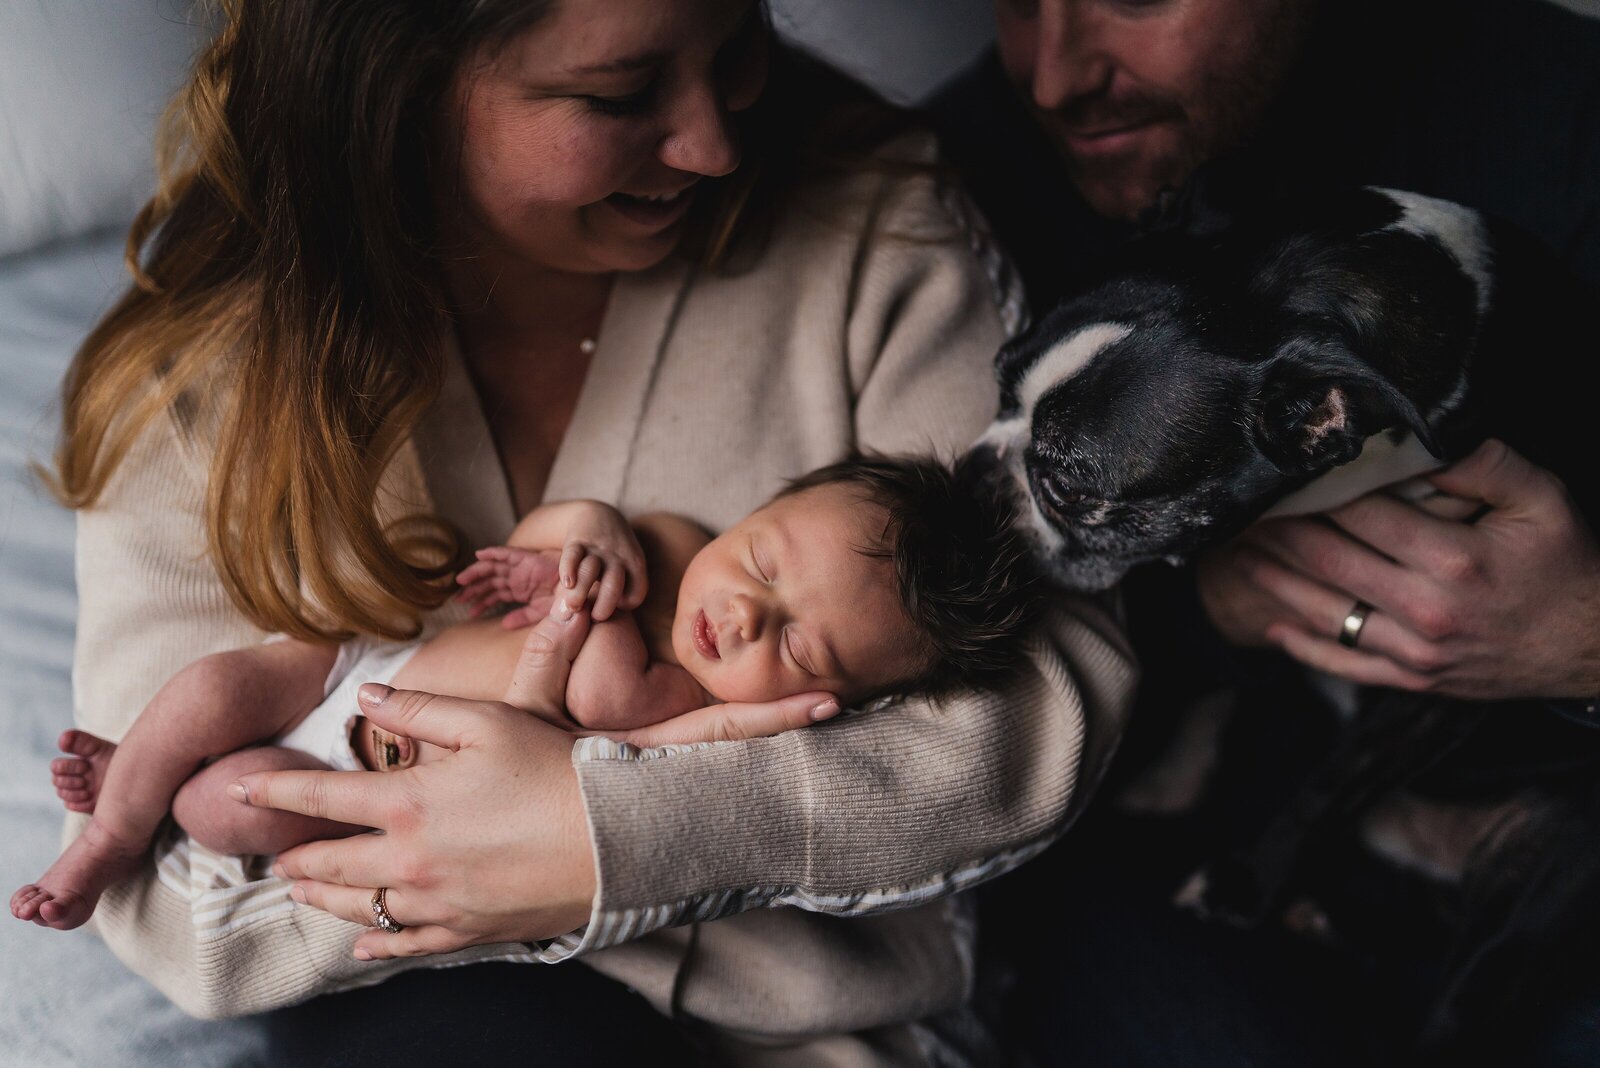 Family newborn photo with dog, baby and parents